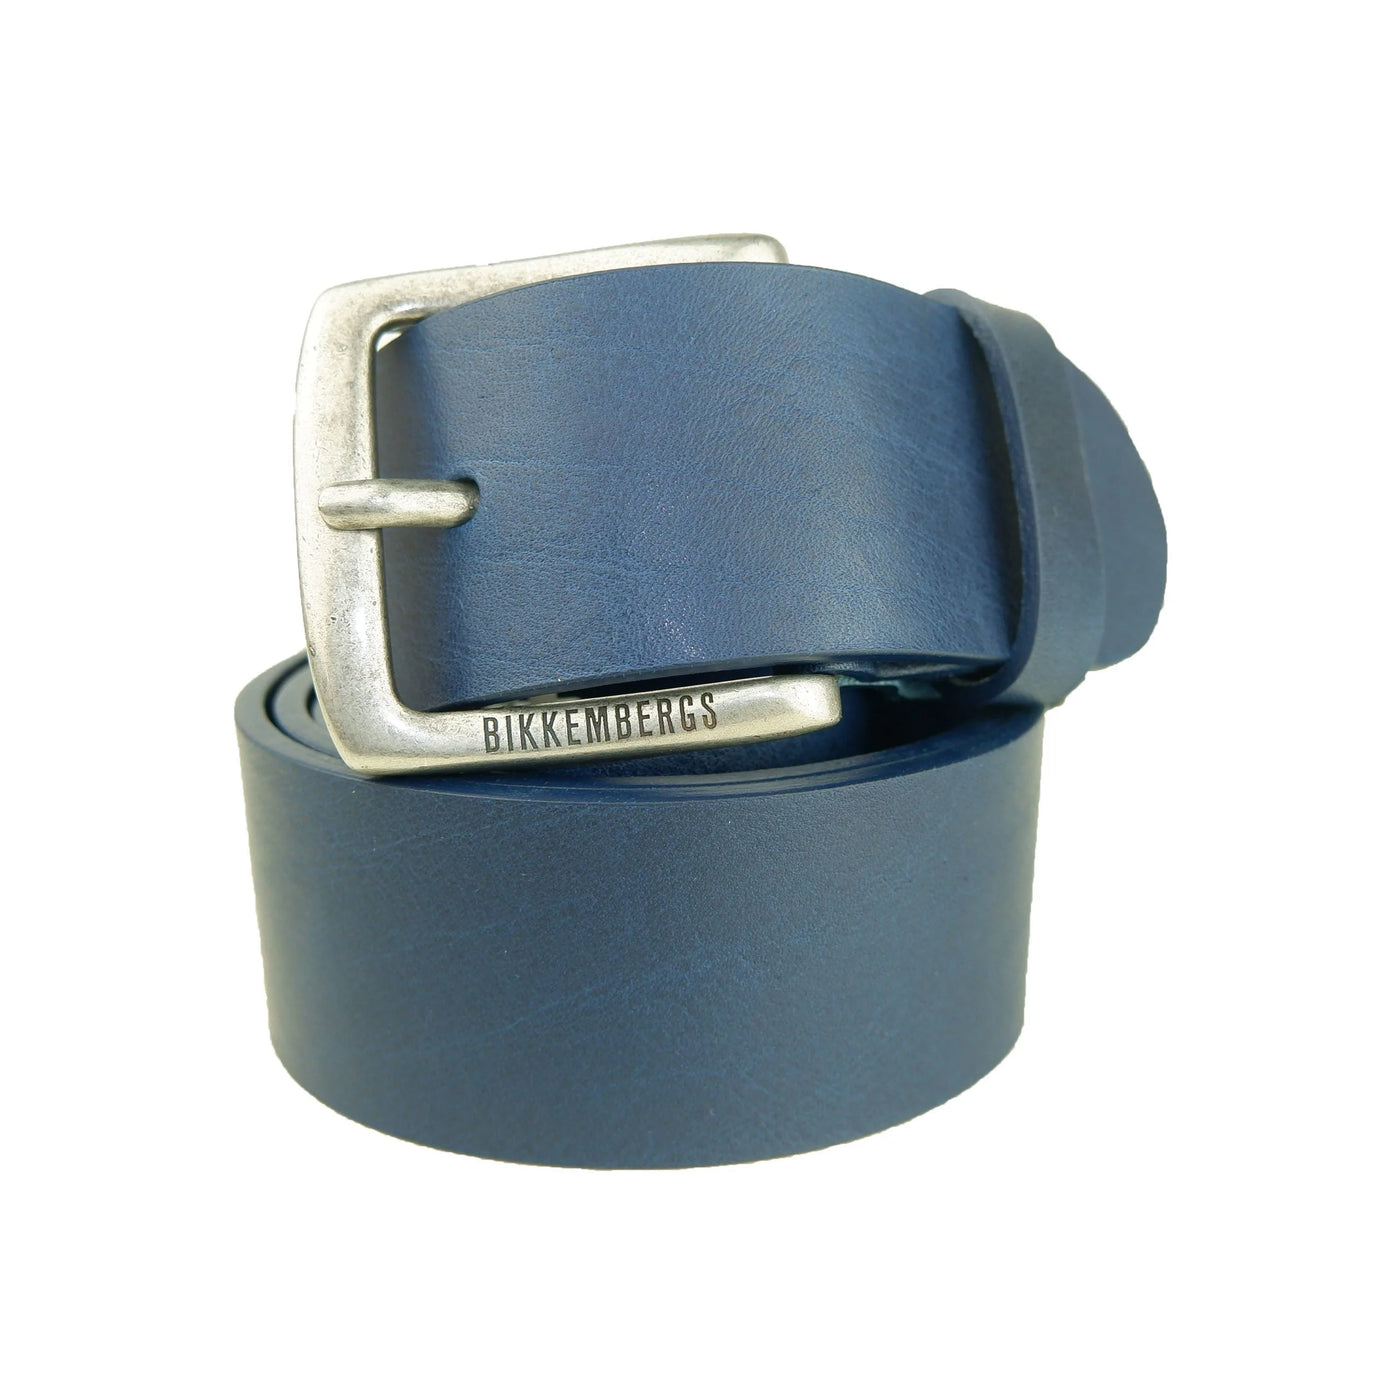 E- Bikkembergs Belt #men, 100 cm / 40 Inches, 105 cm / 42 Inches, 110 cm / 44 Inches, 90 cm / 36 Inches, Belts - Men - Accessories, Bikkembergs, Blue, feed-agegroup-adult, feed-color-Blue, feed-gender-male at SEYMAYKA